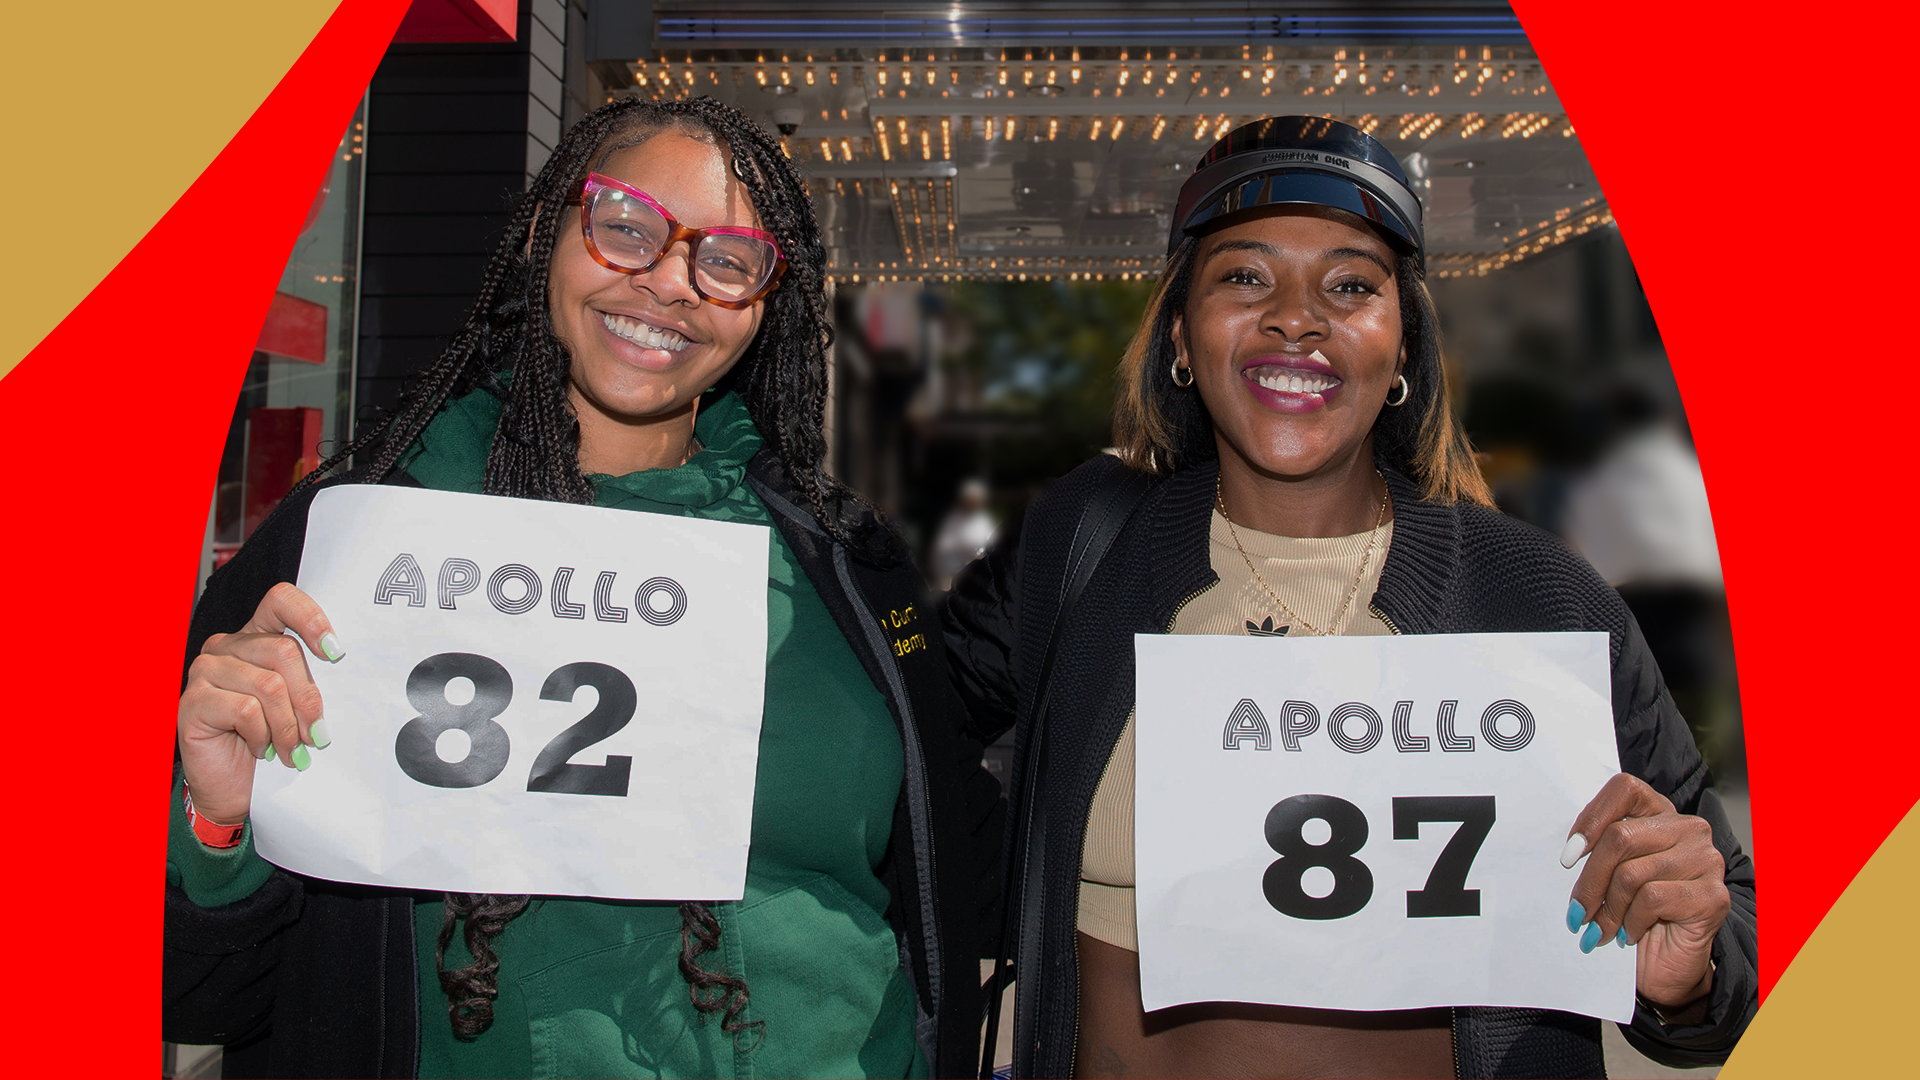 Two Amateur Night auditionees holding the numbers 82 and 87 respectively, in front of The Apollo's Legendary marquee